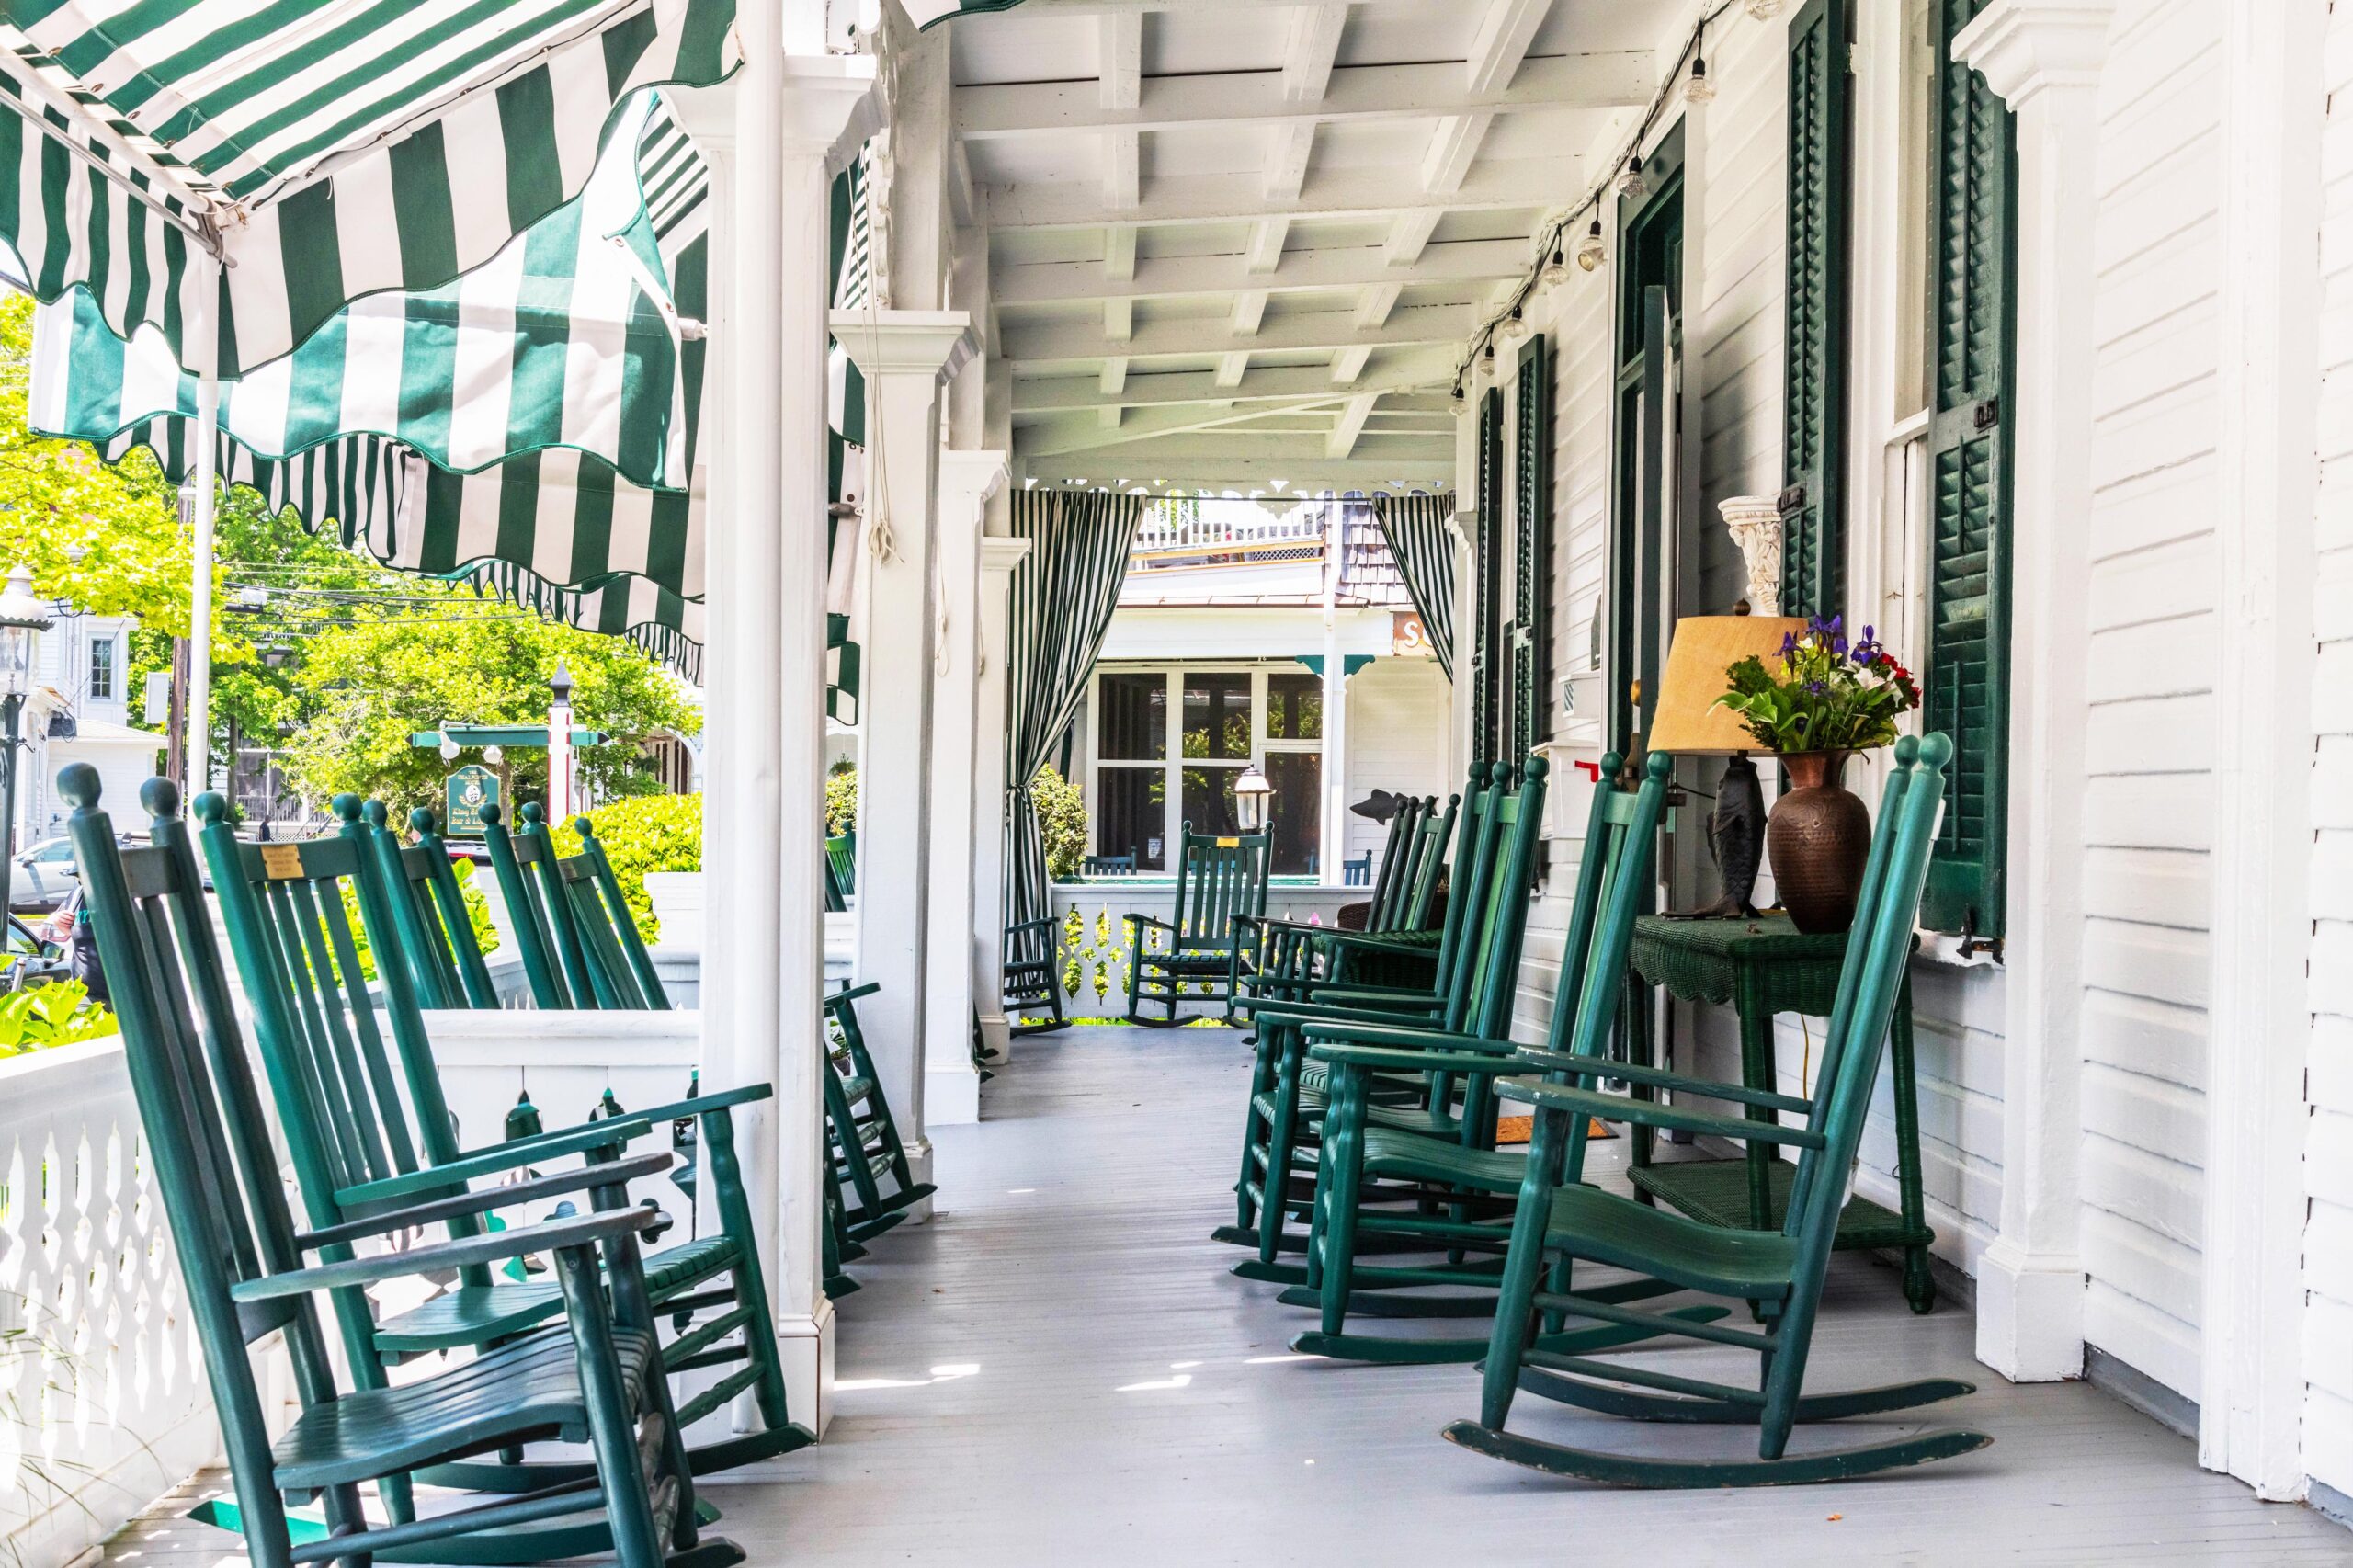 Green rocking chairs on the porch of the Chalfont Hotel on a sunny bright day.